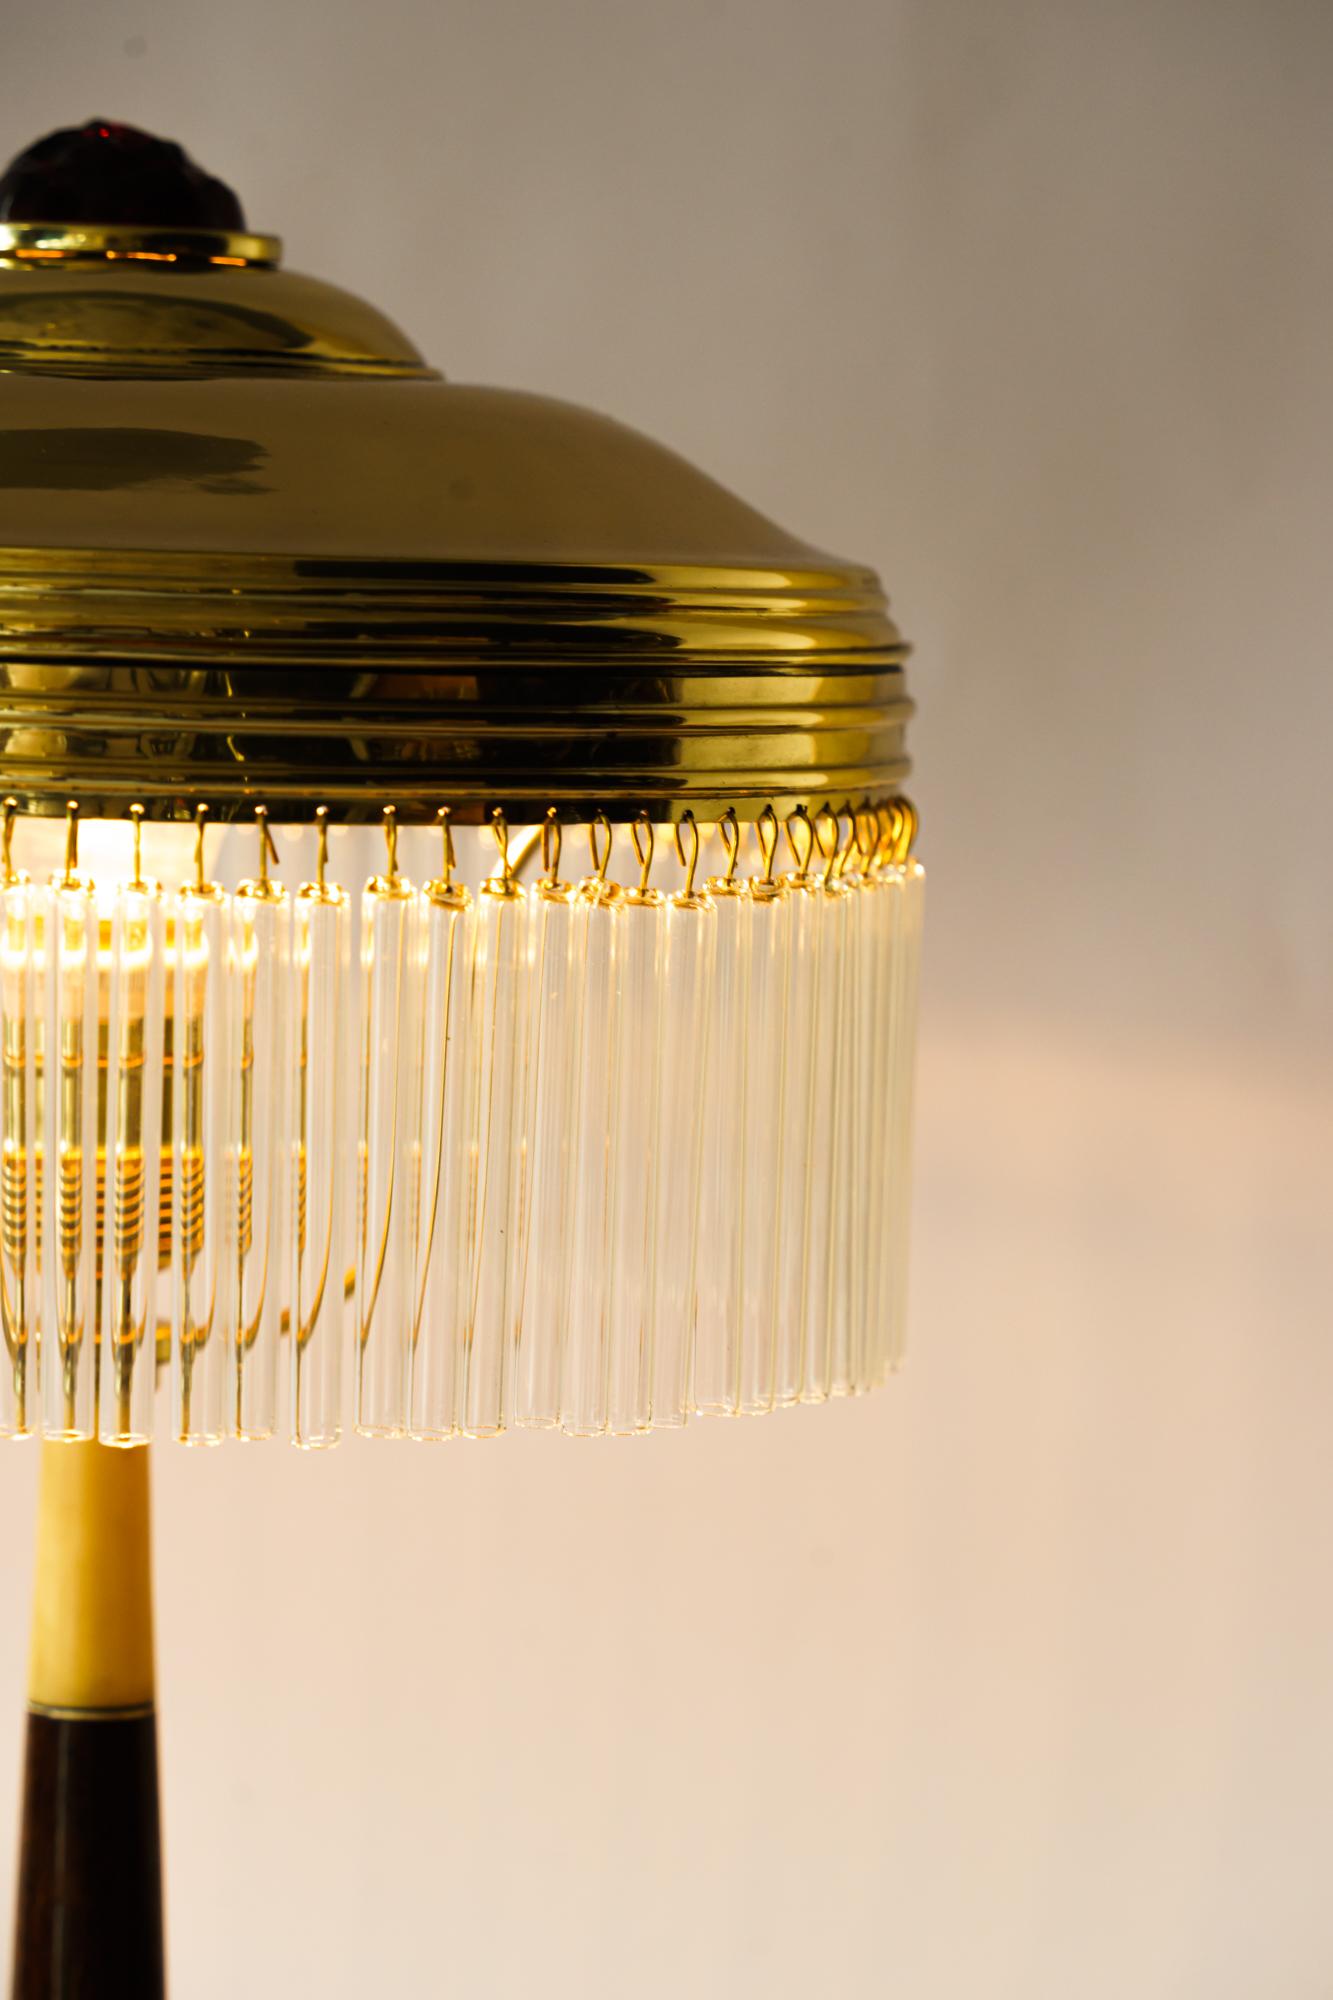 Rare Art Deco Table Lamp with Glass Sticks, Vienna, Around 1920s For Sale 1